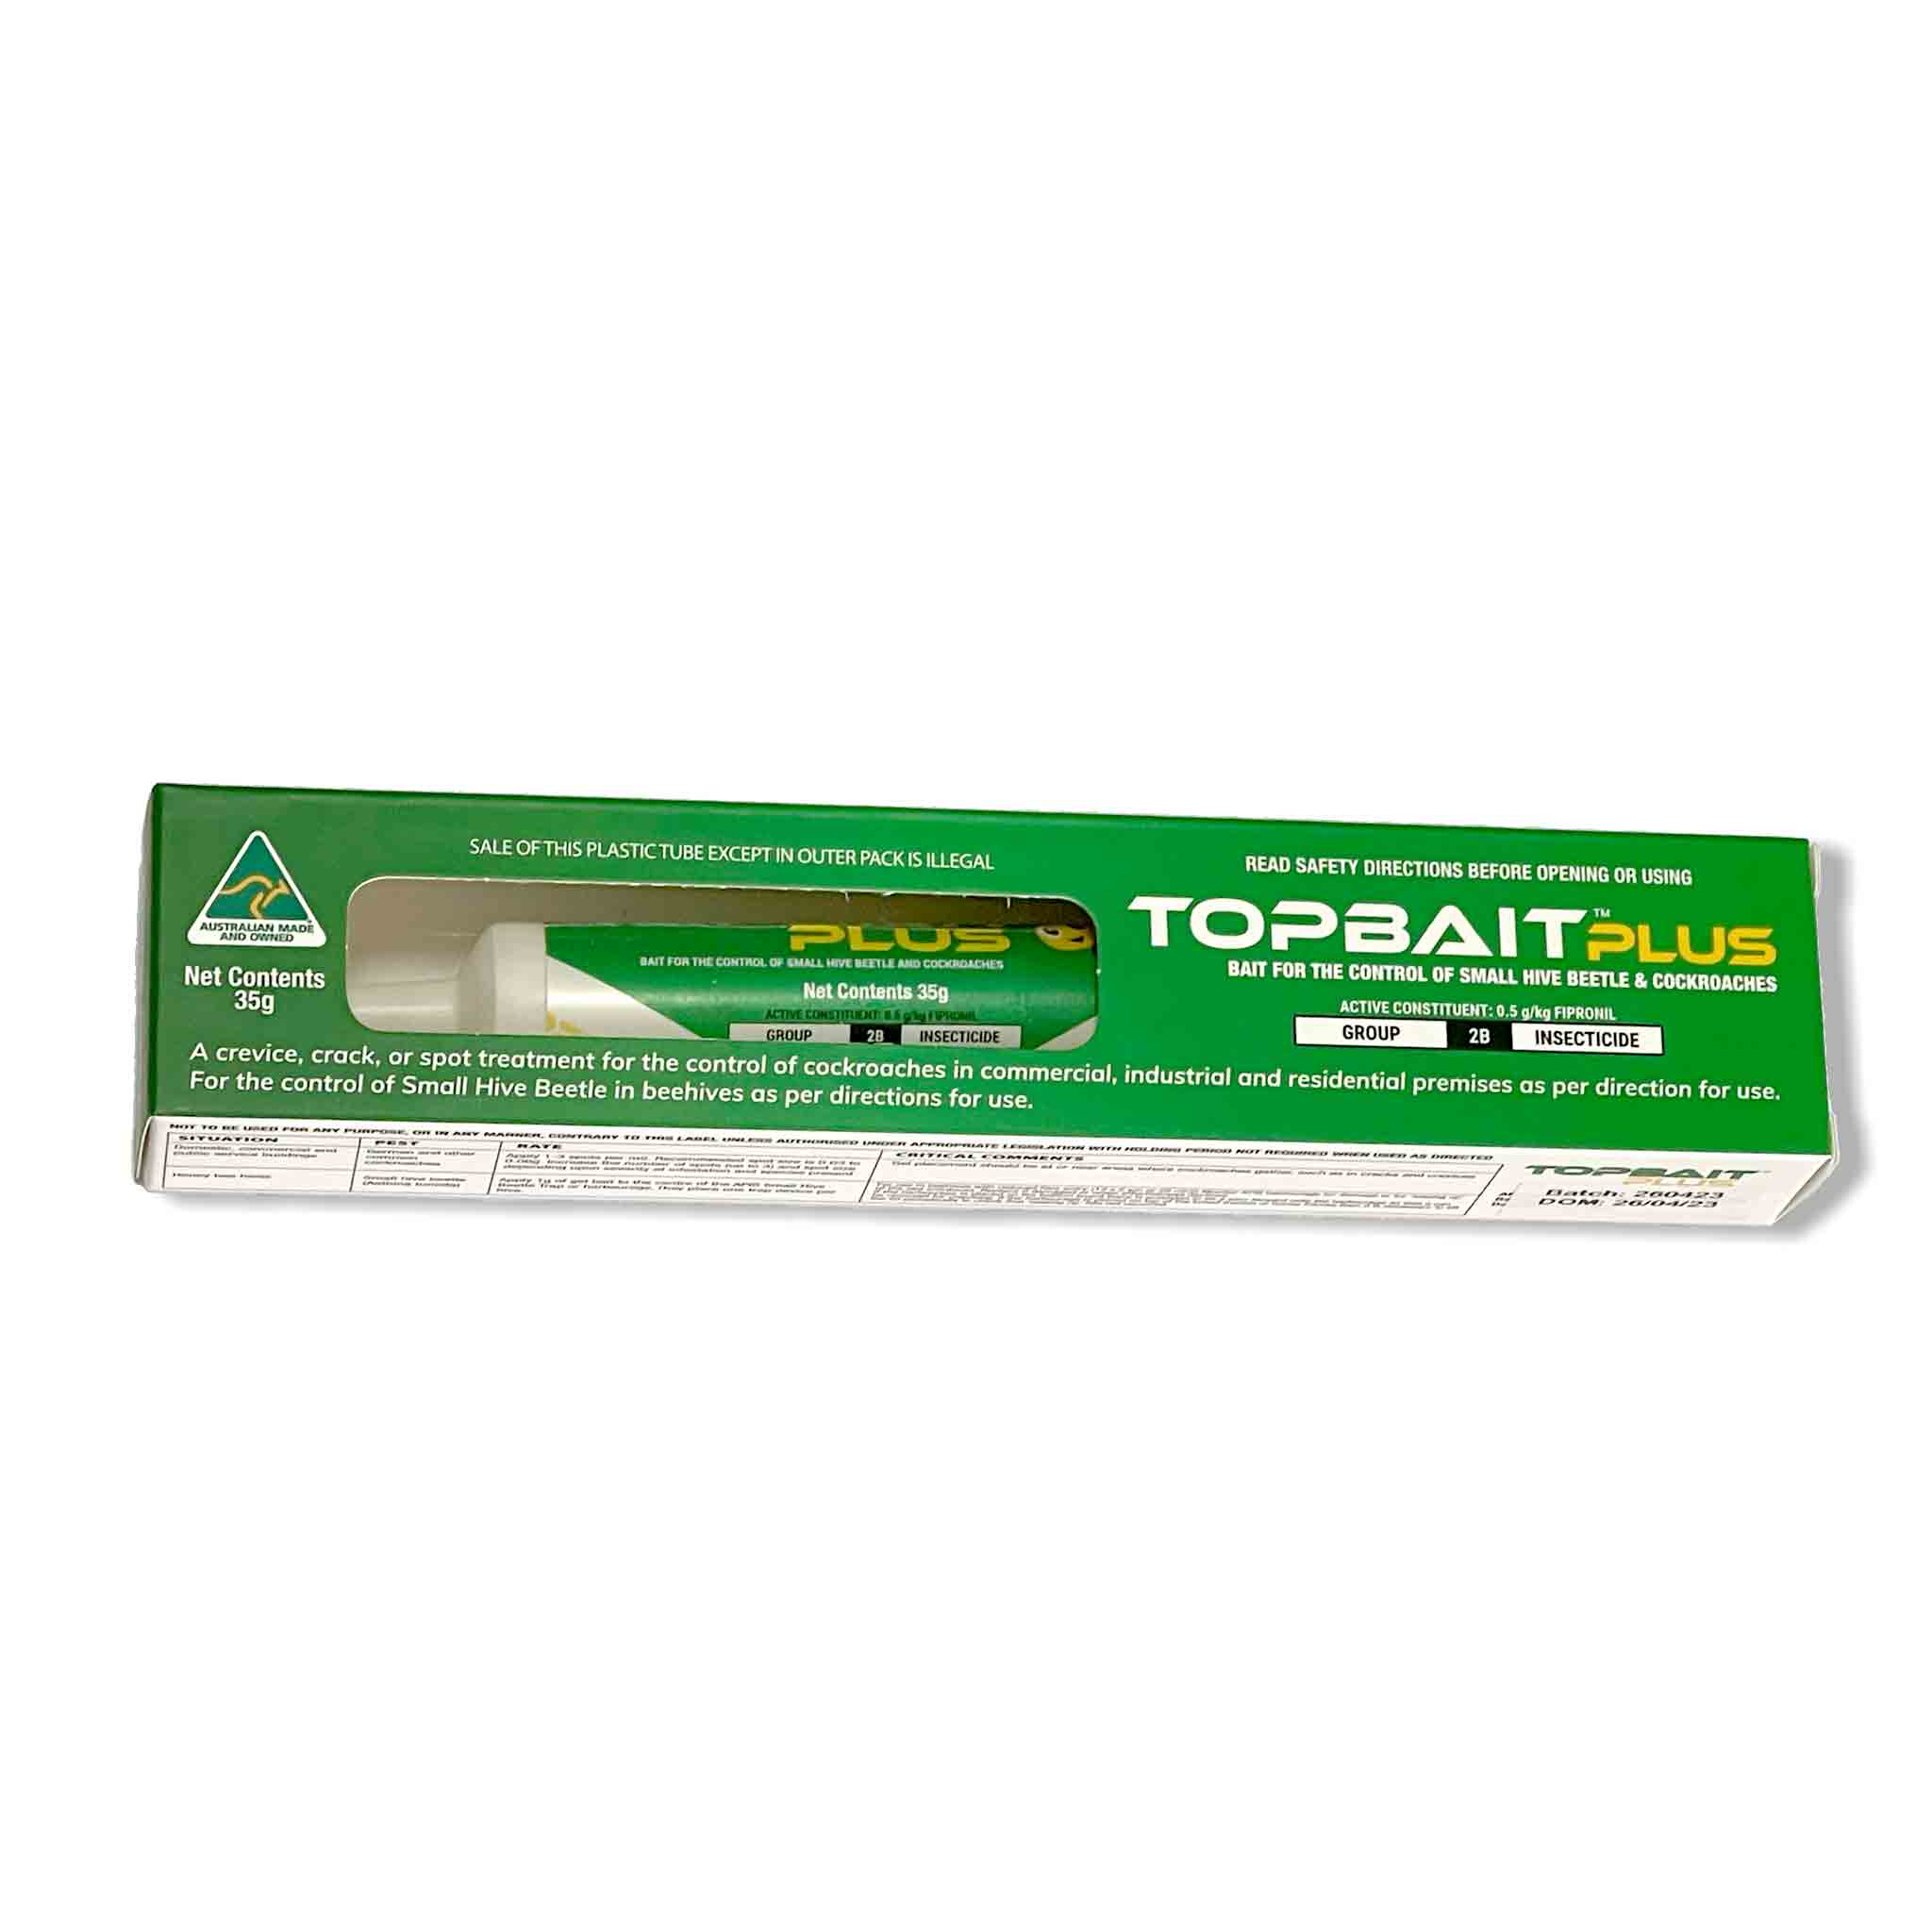 TopBait Plus 35g Applicator for Treatment and Control of Small Hive Beetles and Cockroaches - Health collection by Buzzbee Beekeeping Supplies